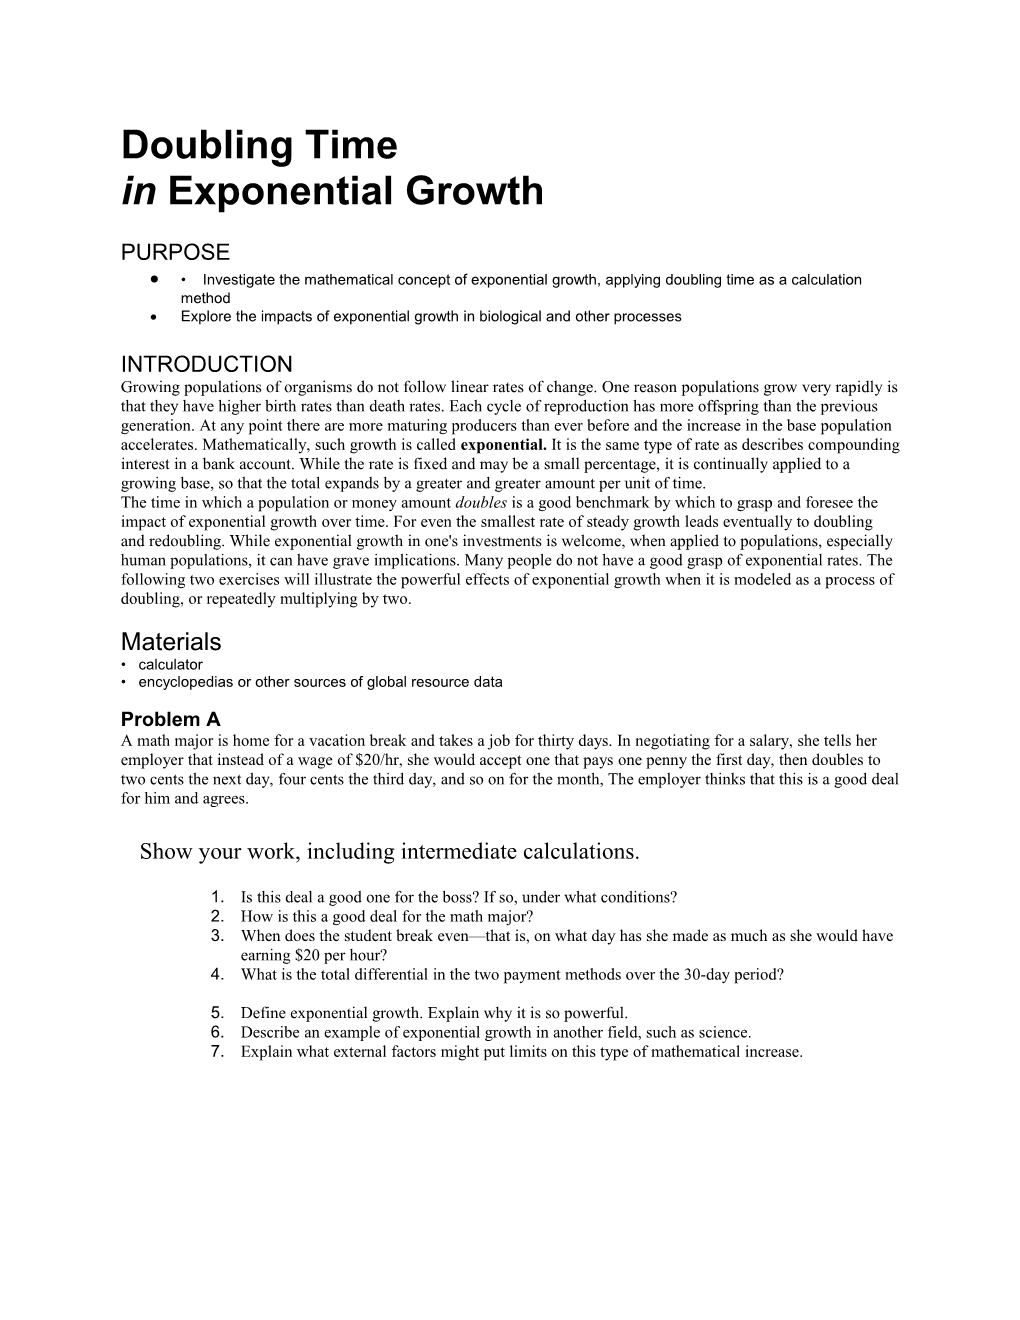 In Exponential Growth